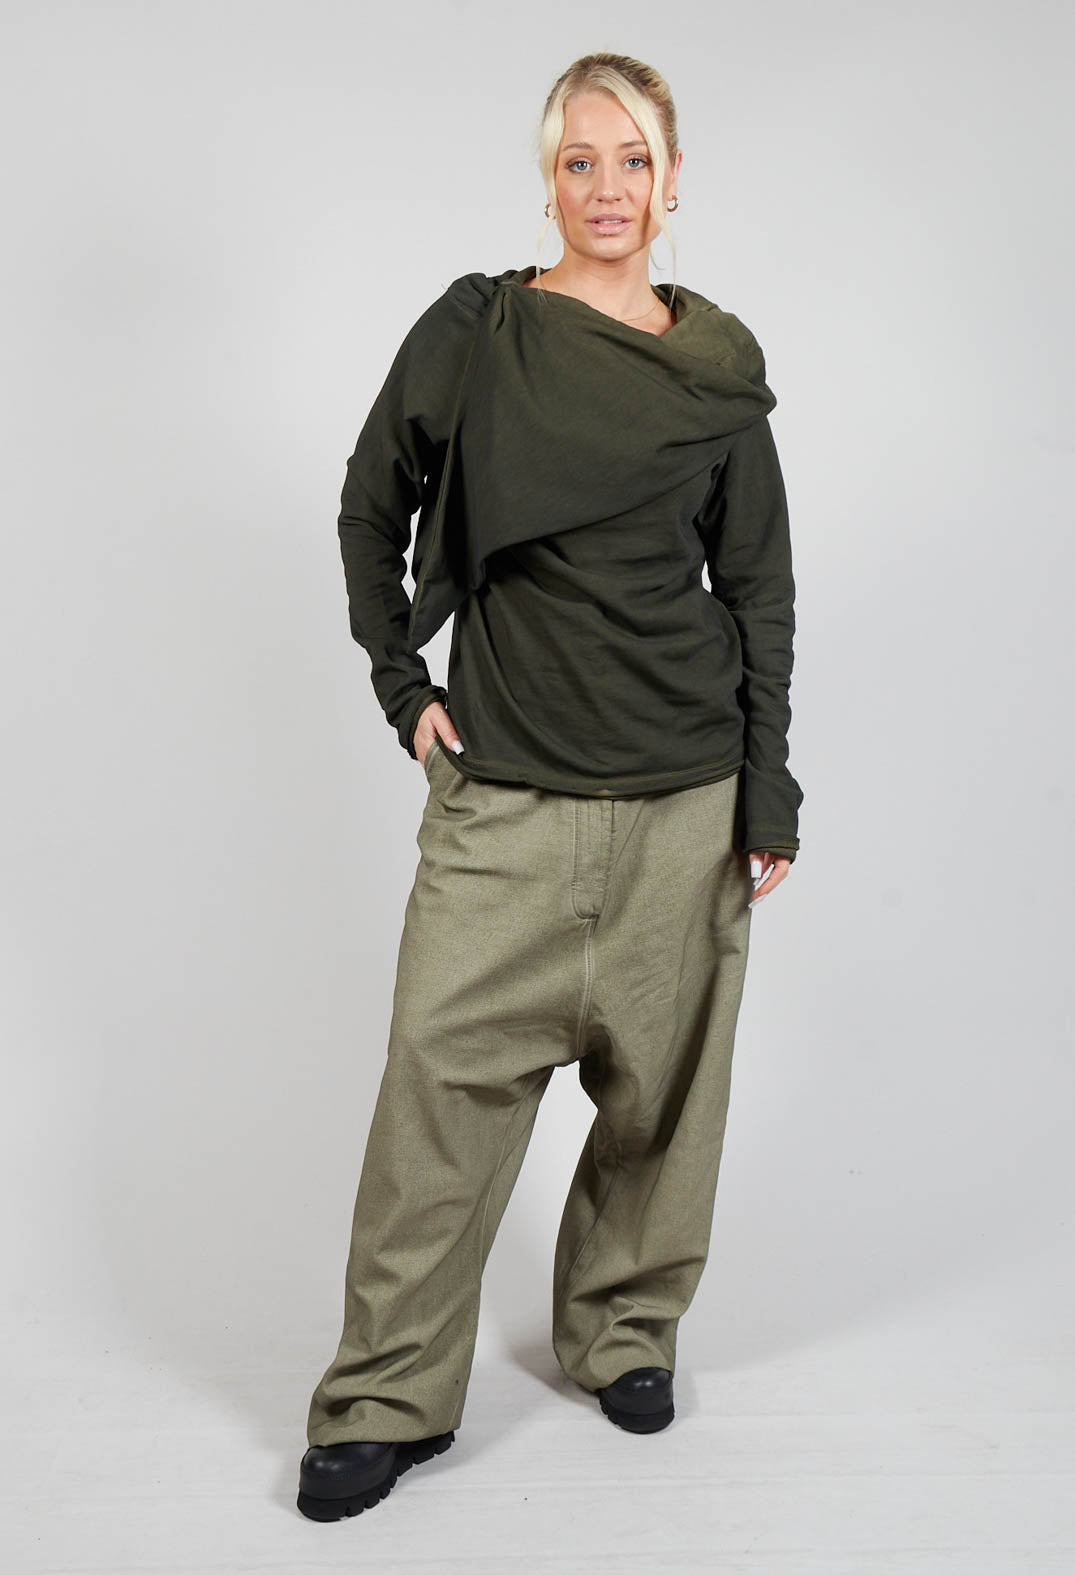 Raw Hemmed Tie Neck Pullover in Olive Cloud